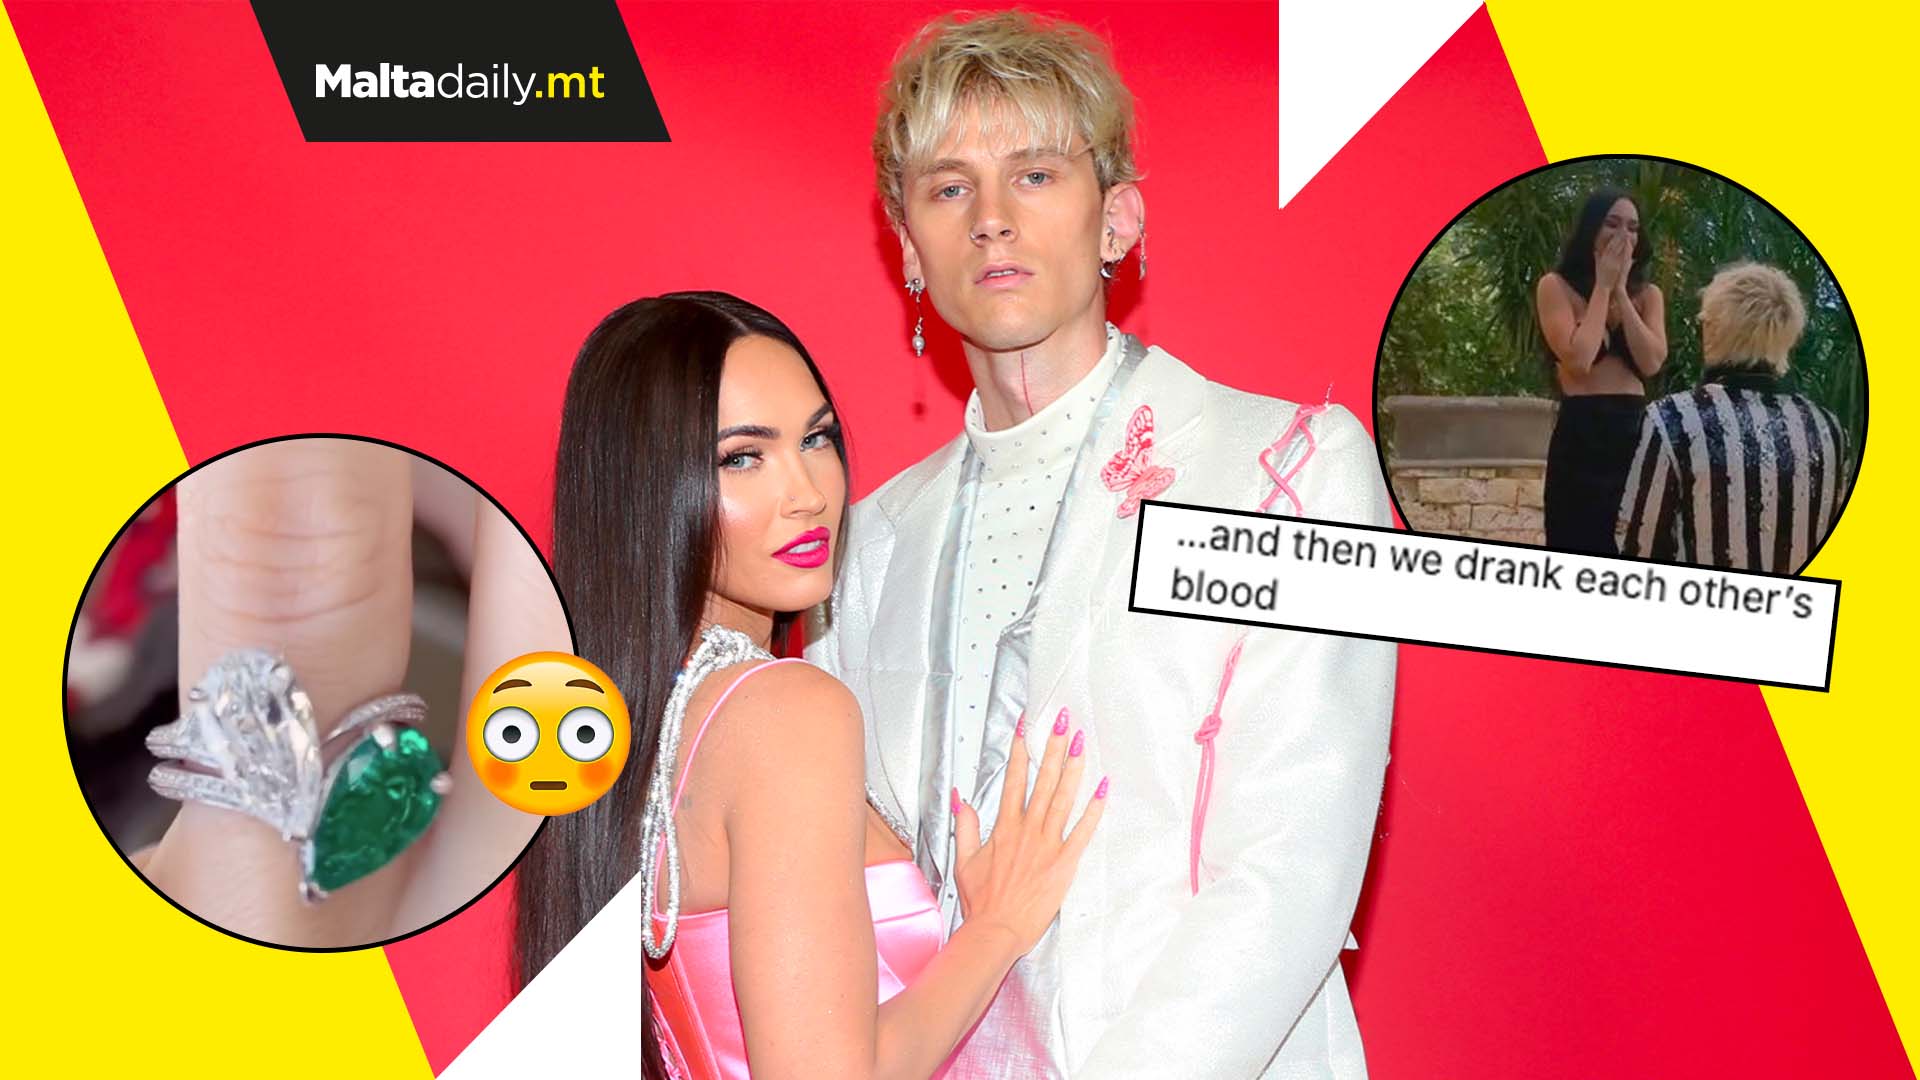 Megan Fox and Machine Gun Kelly ‘drink each other’s blood’ to celebrate engagement